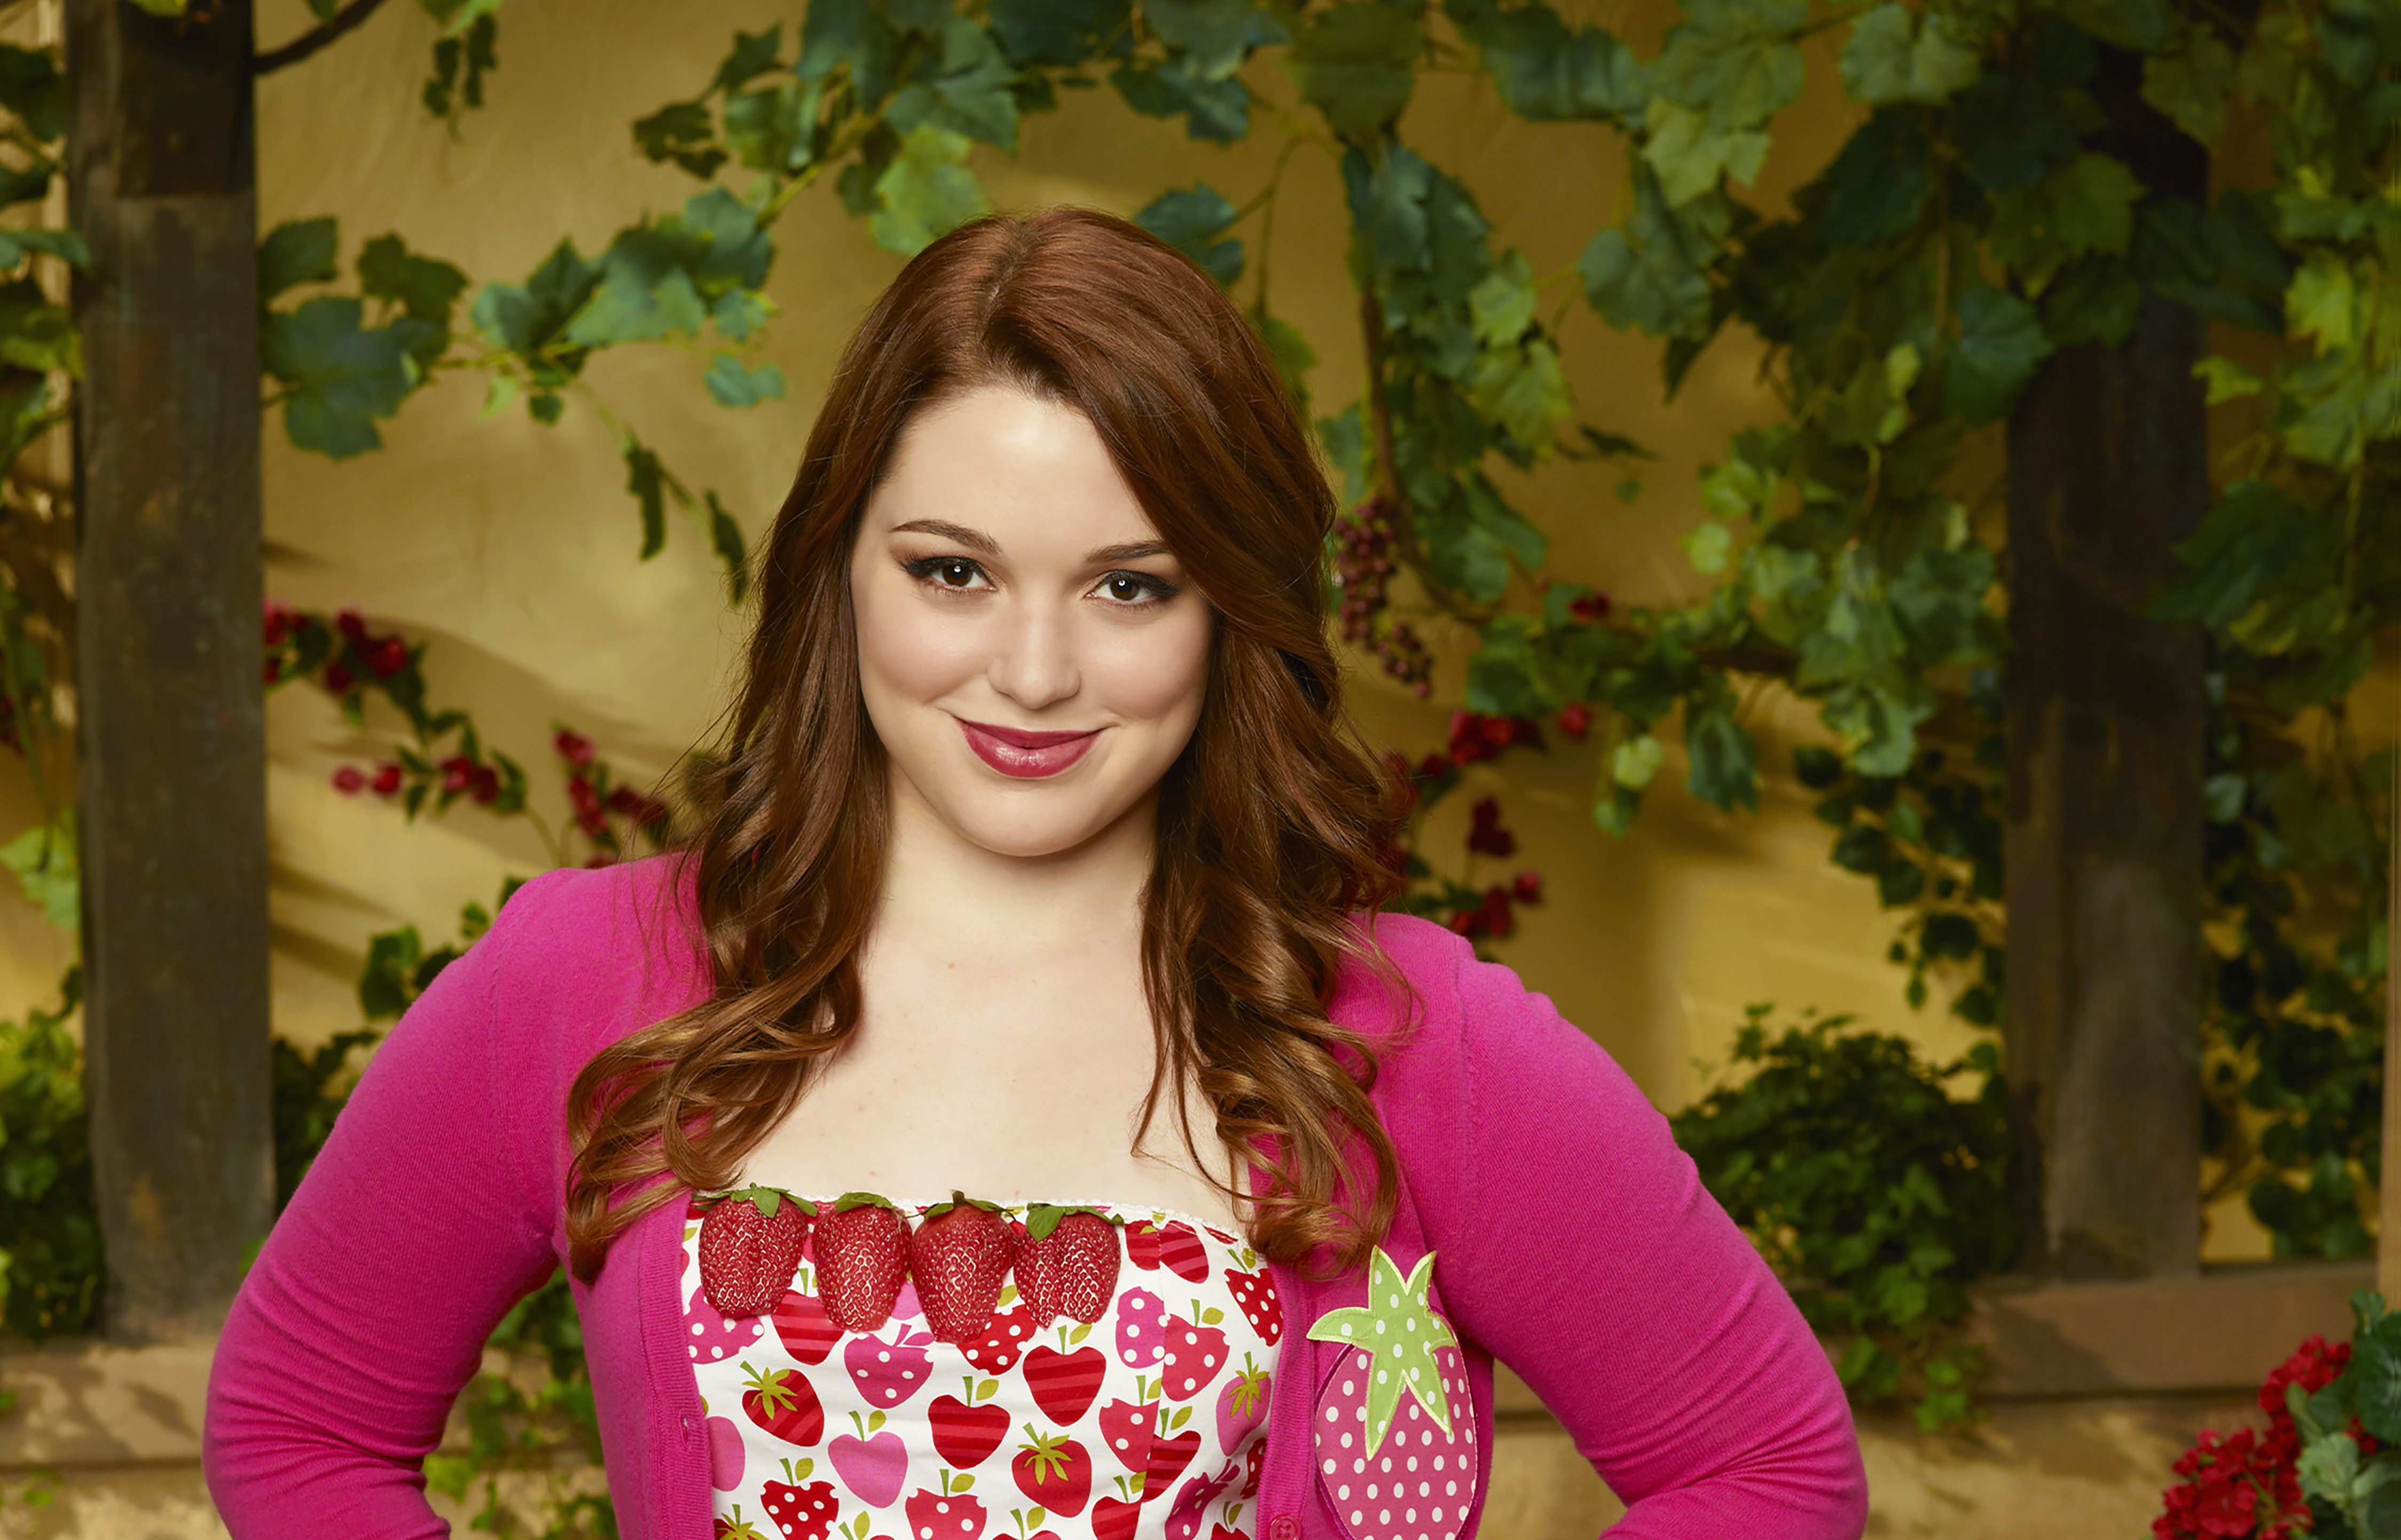 Jennifer Stone From Wizards of Waverly Place Returns to Acting